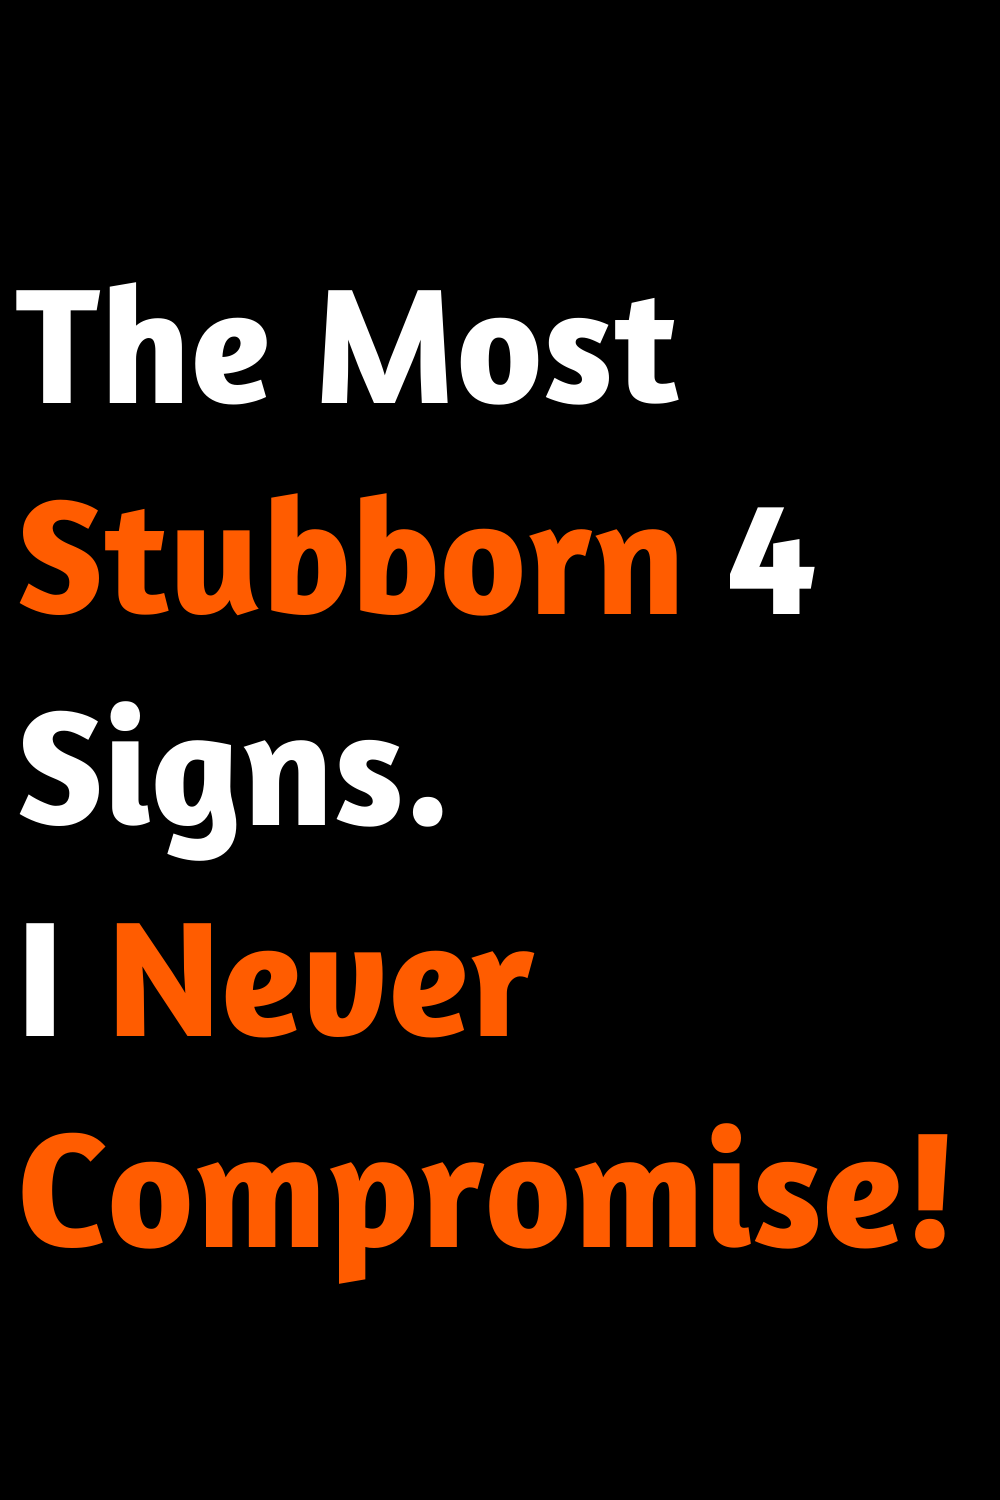 The Most Stubborn 4 Signs. I Never Compromise!